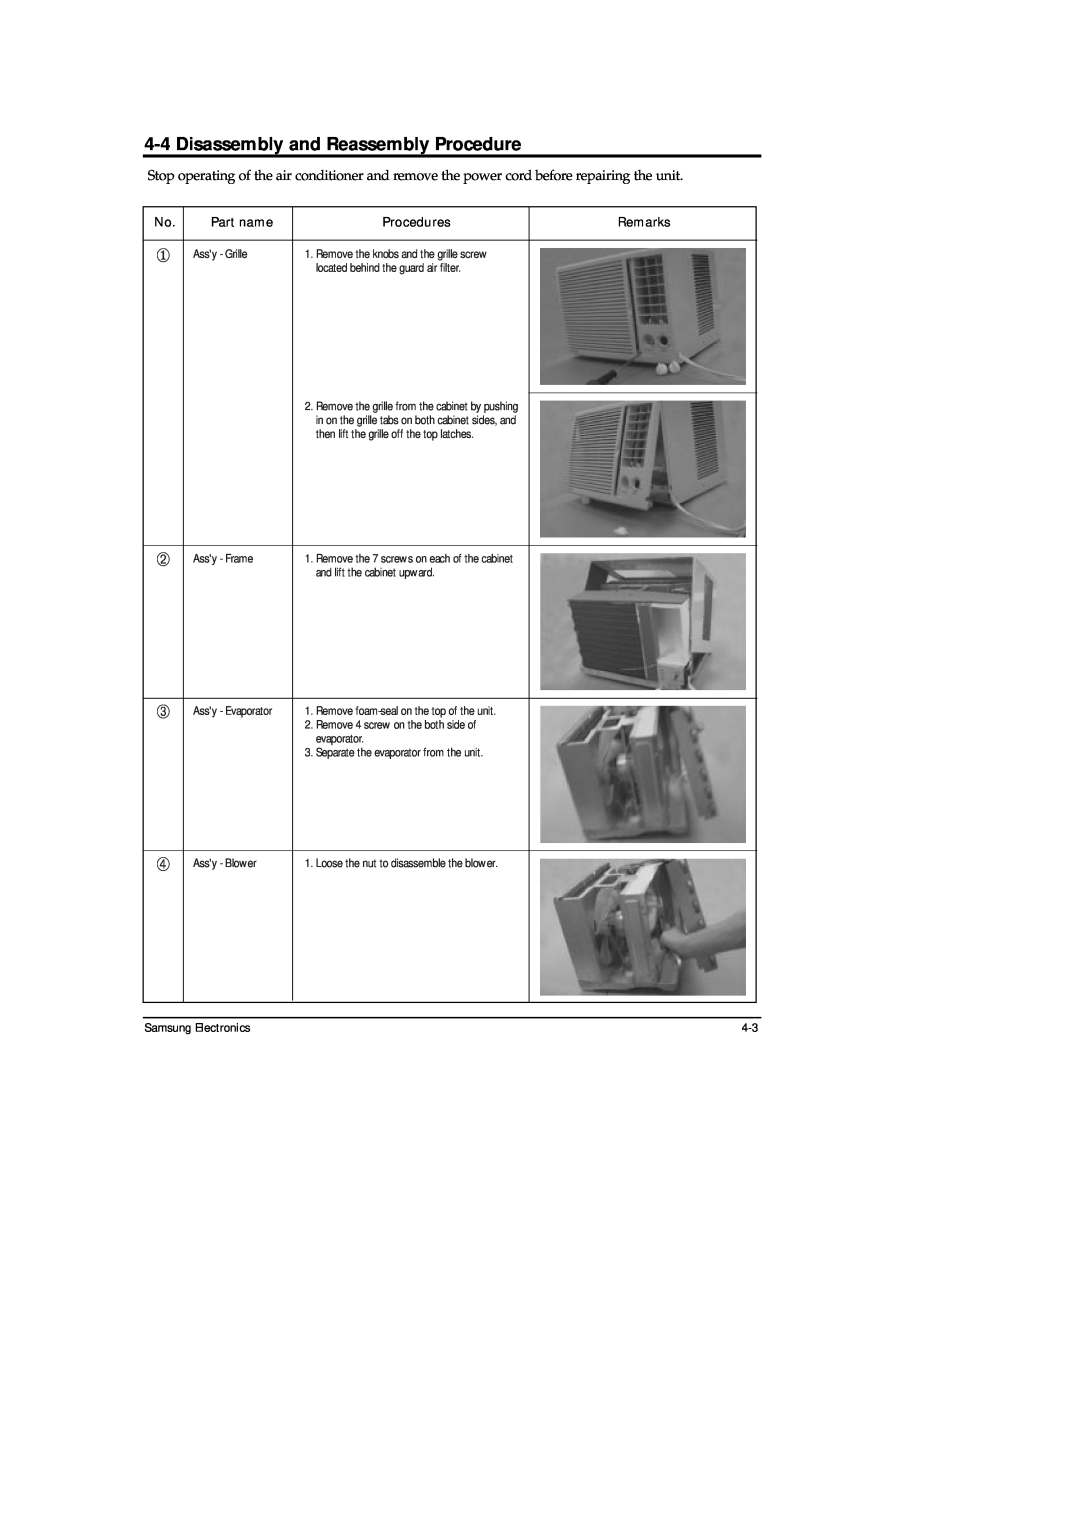 Samsung AW05B05A(AW0500 4-4Disassembly and Reassembly Procedure, Samsung Electronics, Part name, Procedures, Remarks 